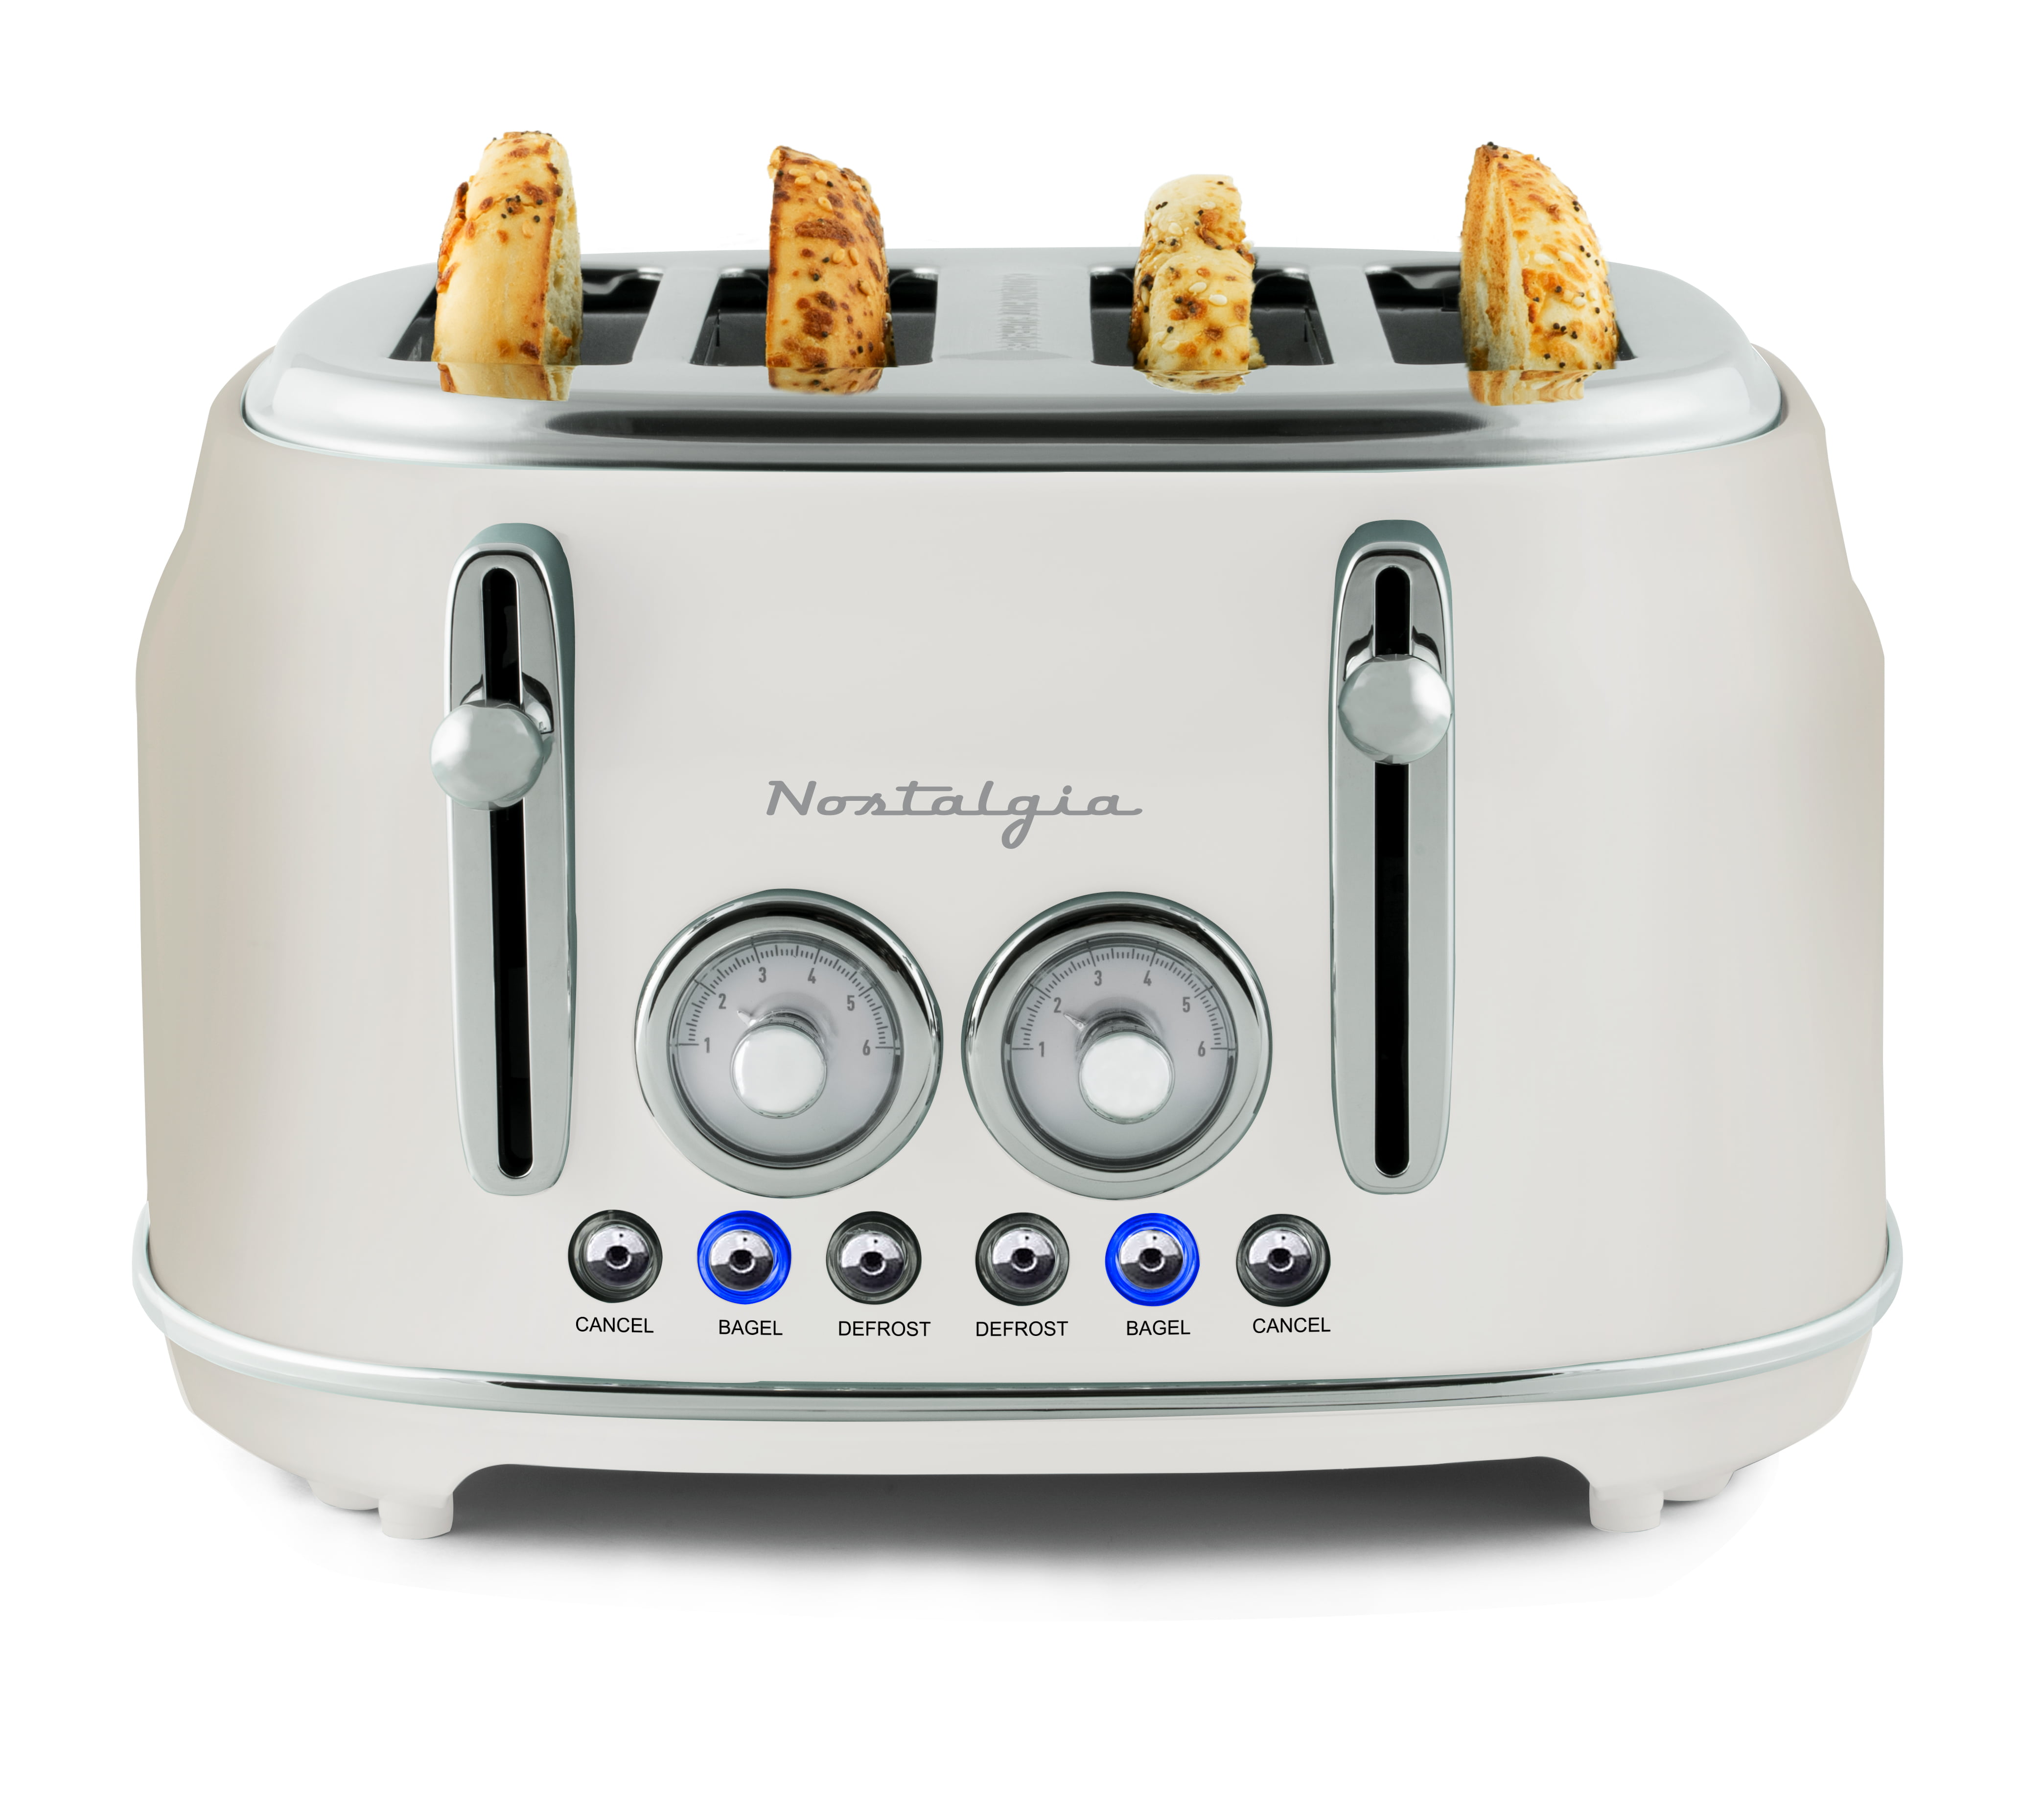 Best Buy: Applica Toast-R-Oven Classic 4-Slice Toaster Oven White